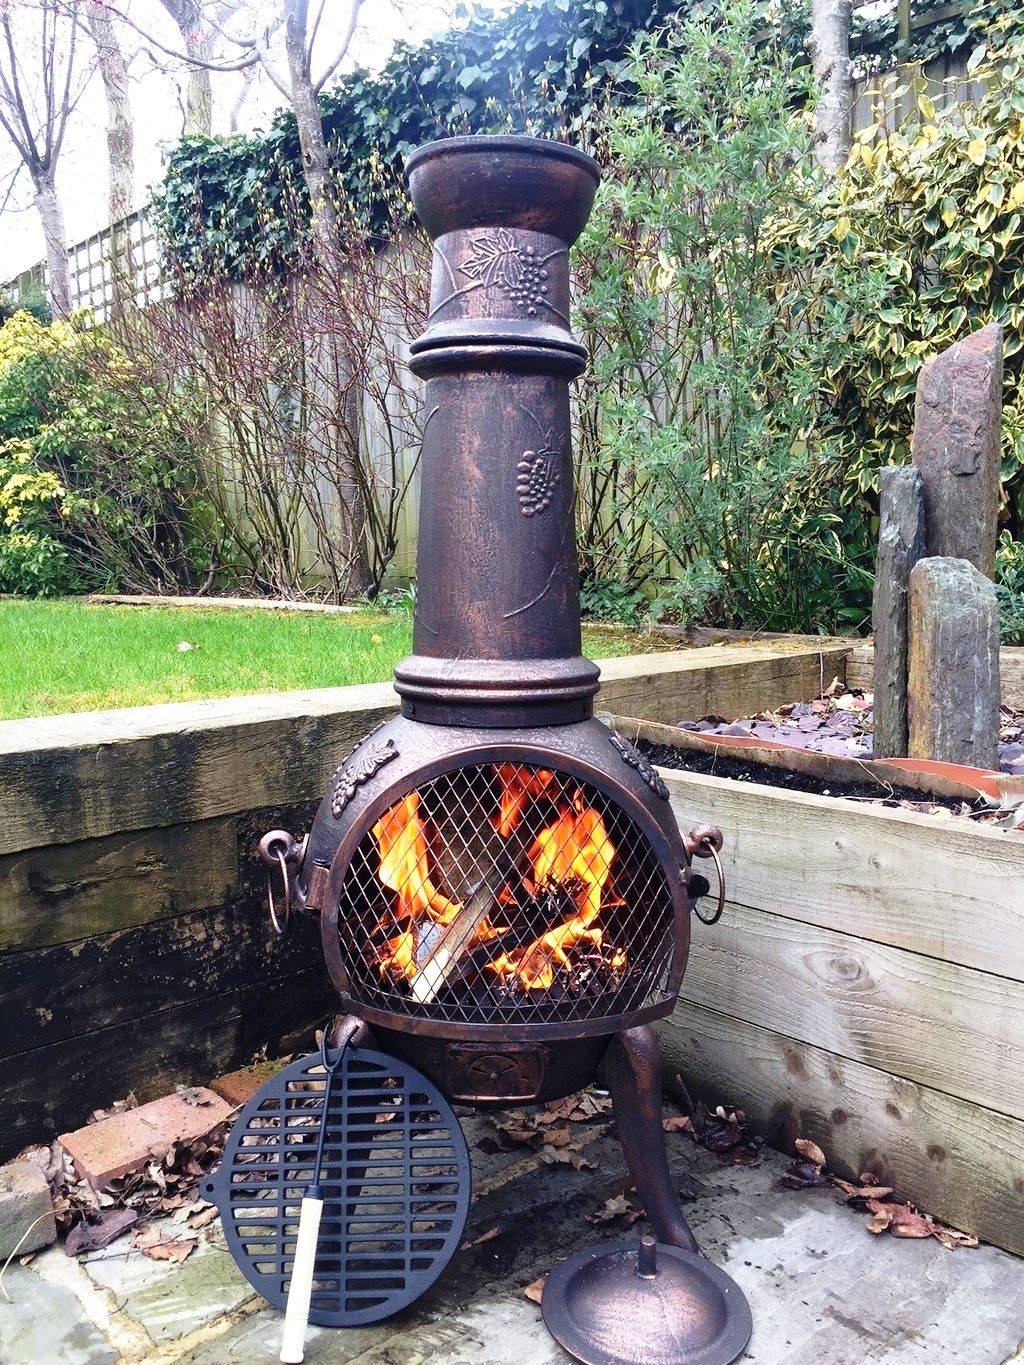 Our Review Of The 5 Best Cast Iron Chimineas